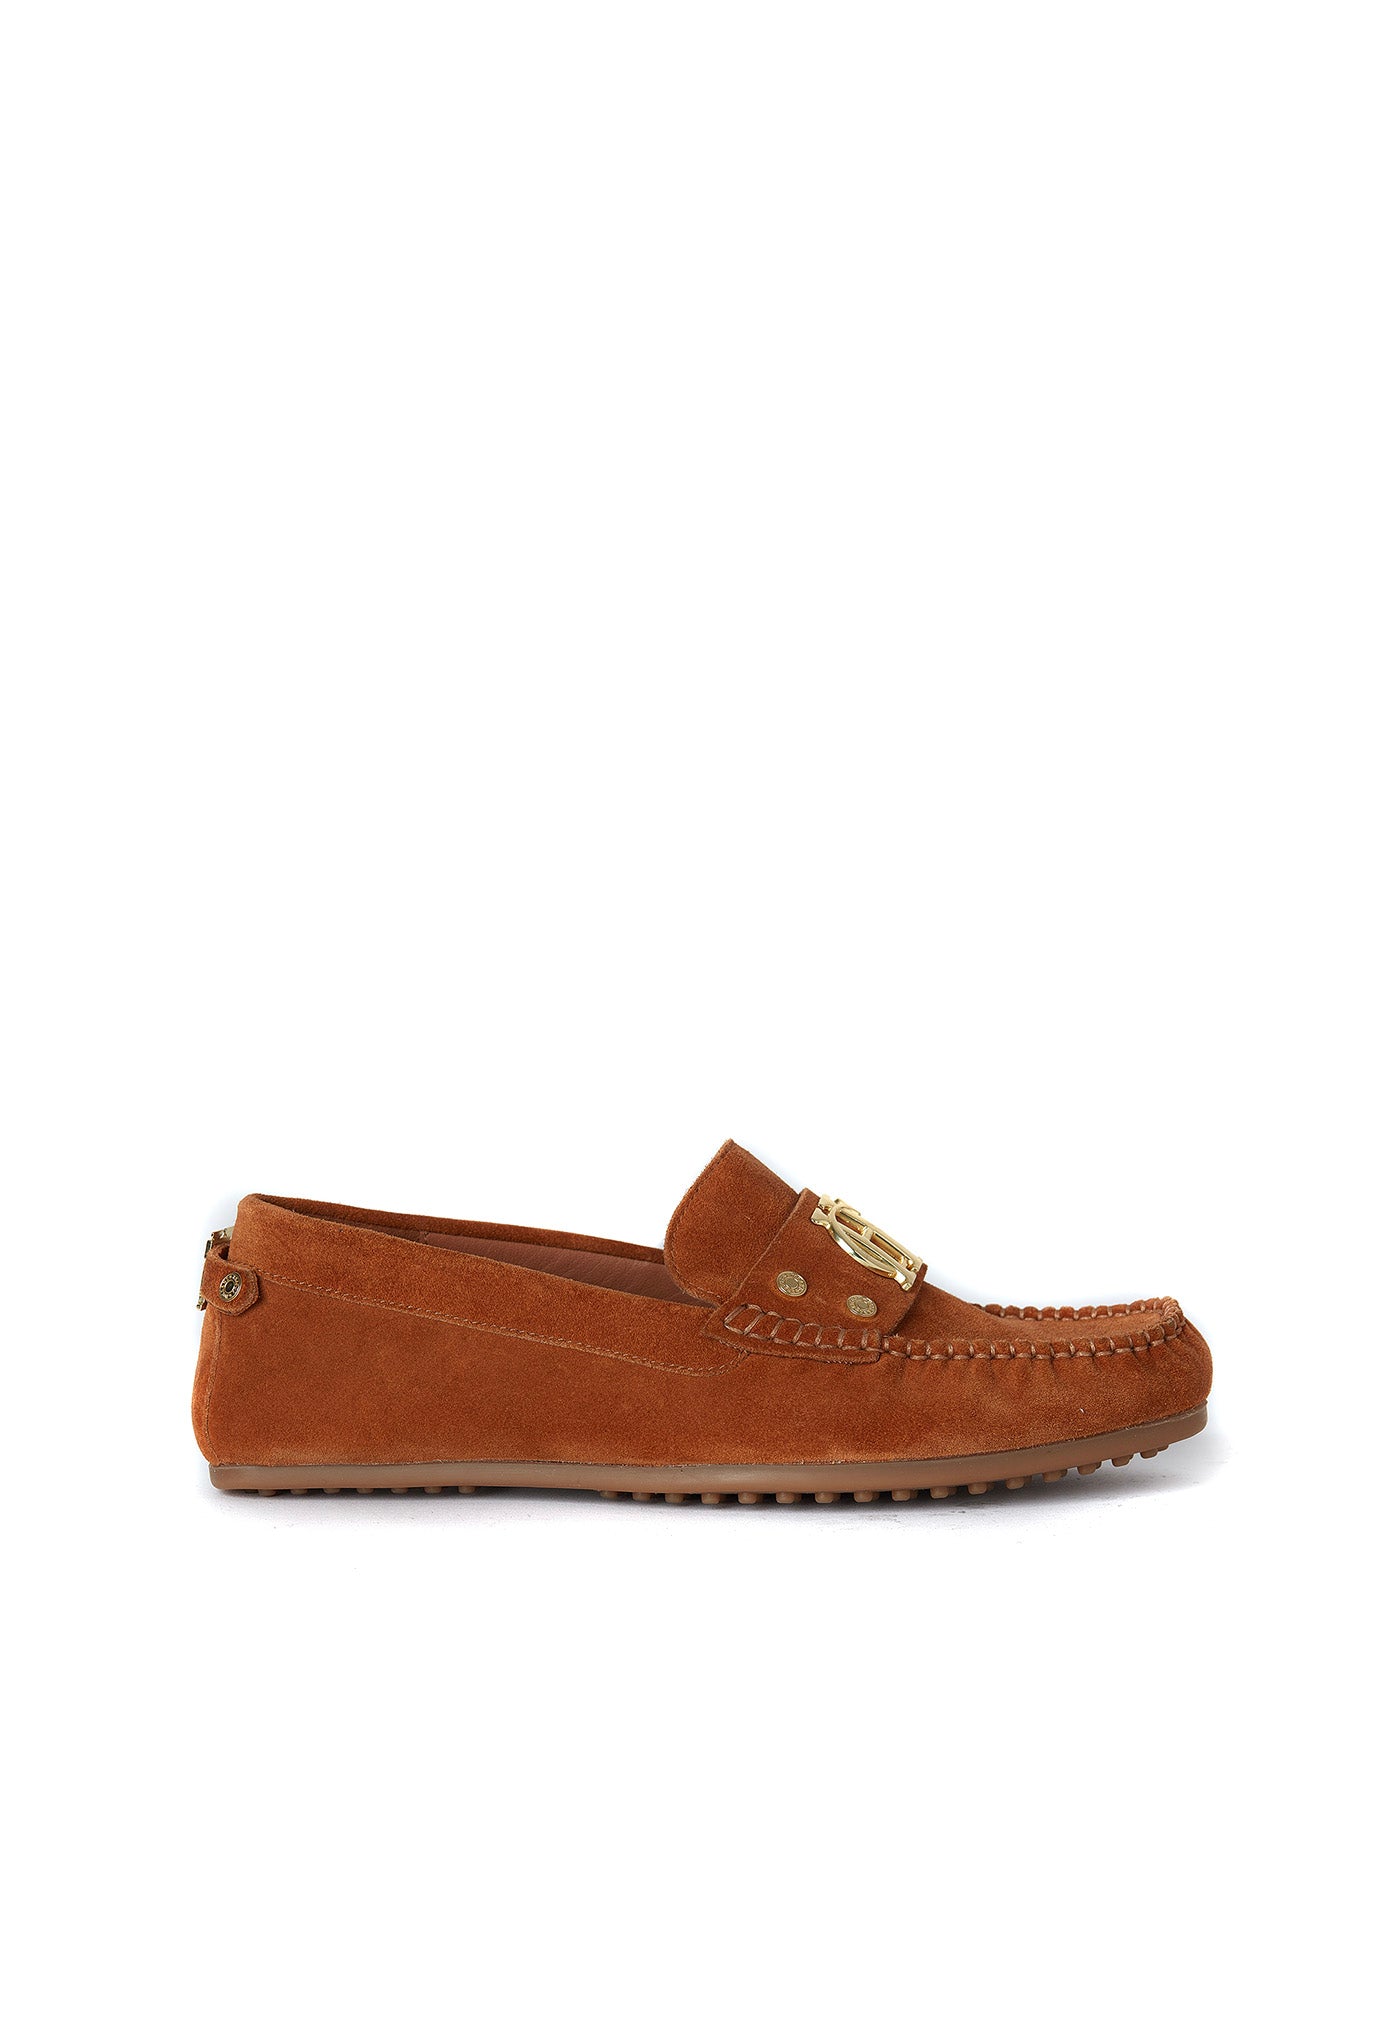 The Driving Loafer - Tan sold by Angel Divine